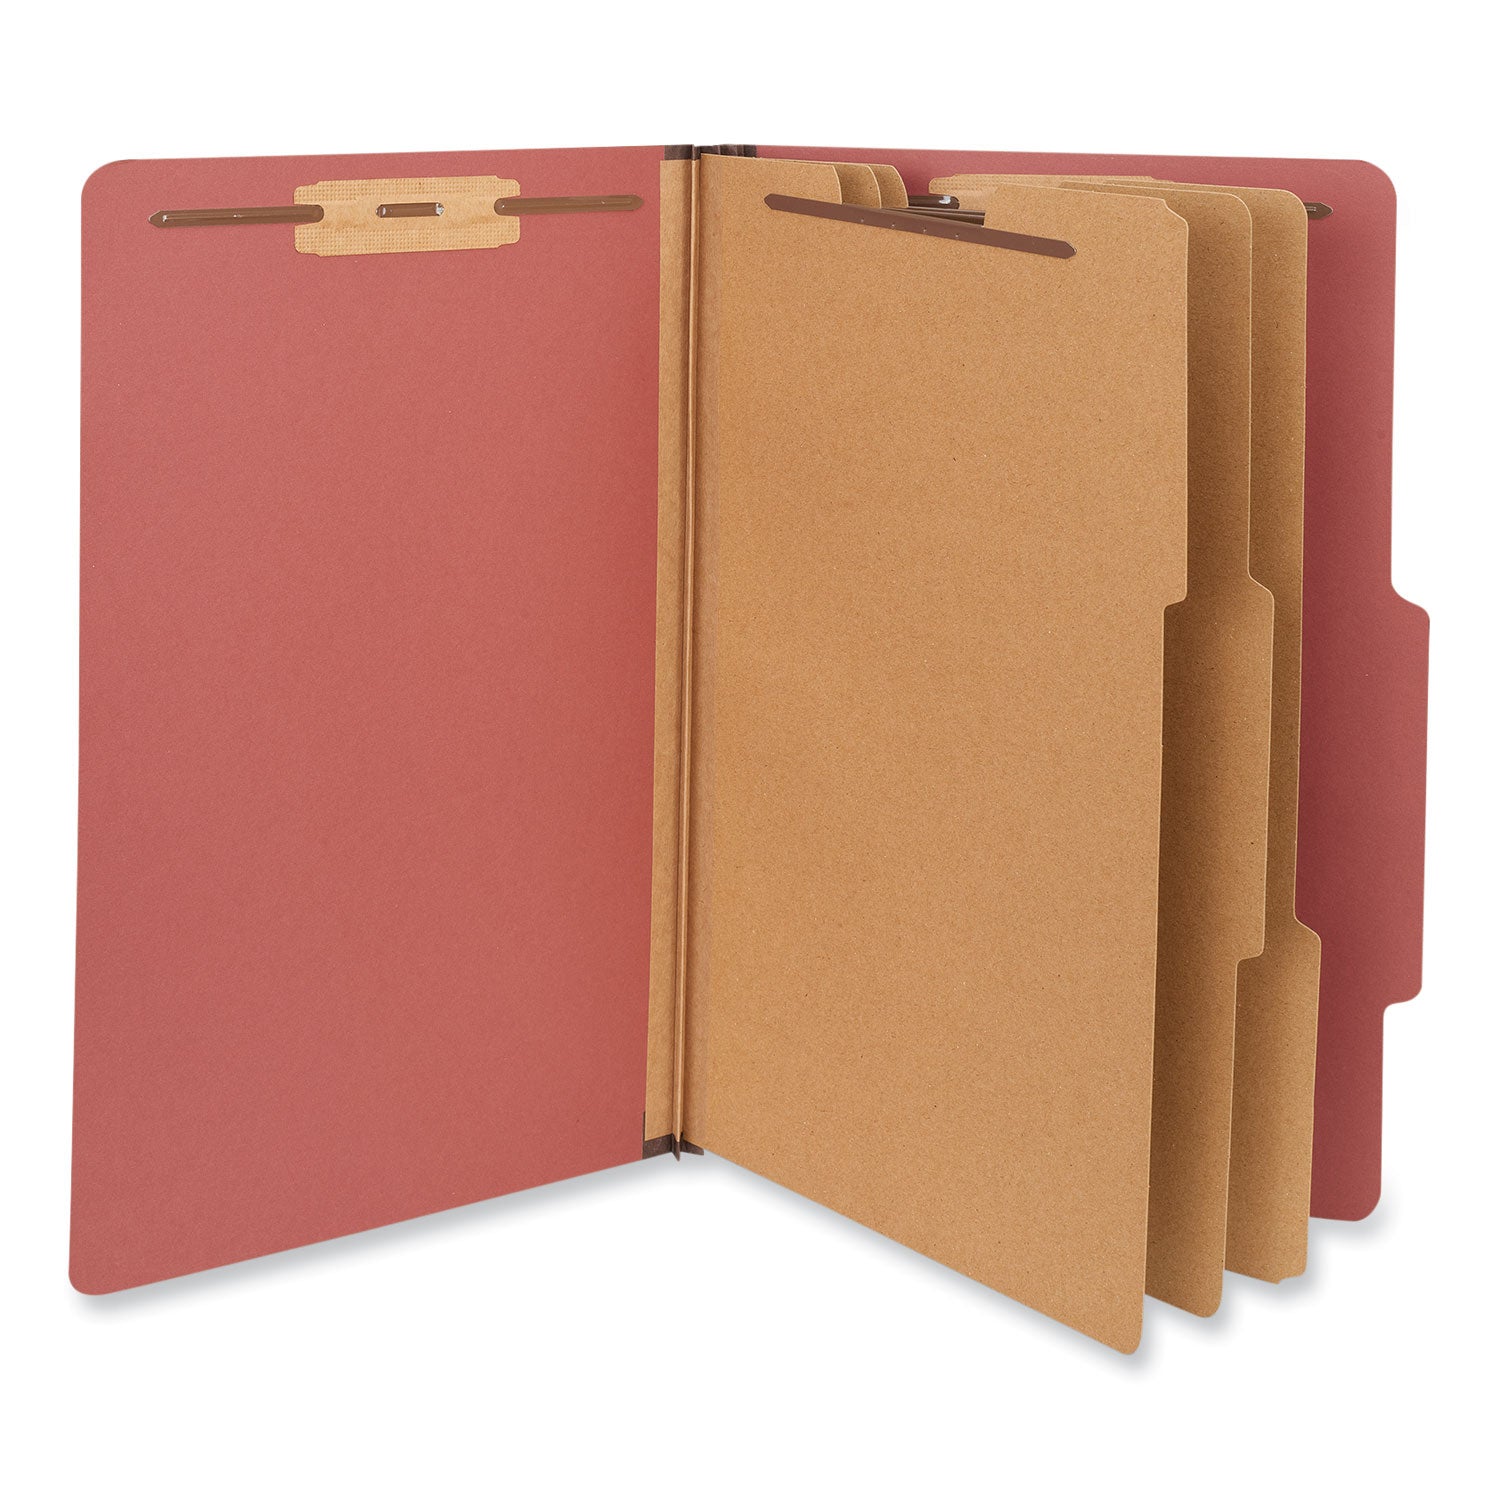 Eight-Section Pressboard Classification Folders, 3" Expansion, 3 Dividers, 8 Fasteners, Legal Size, Red Exterior, 10/Box - 